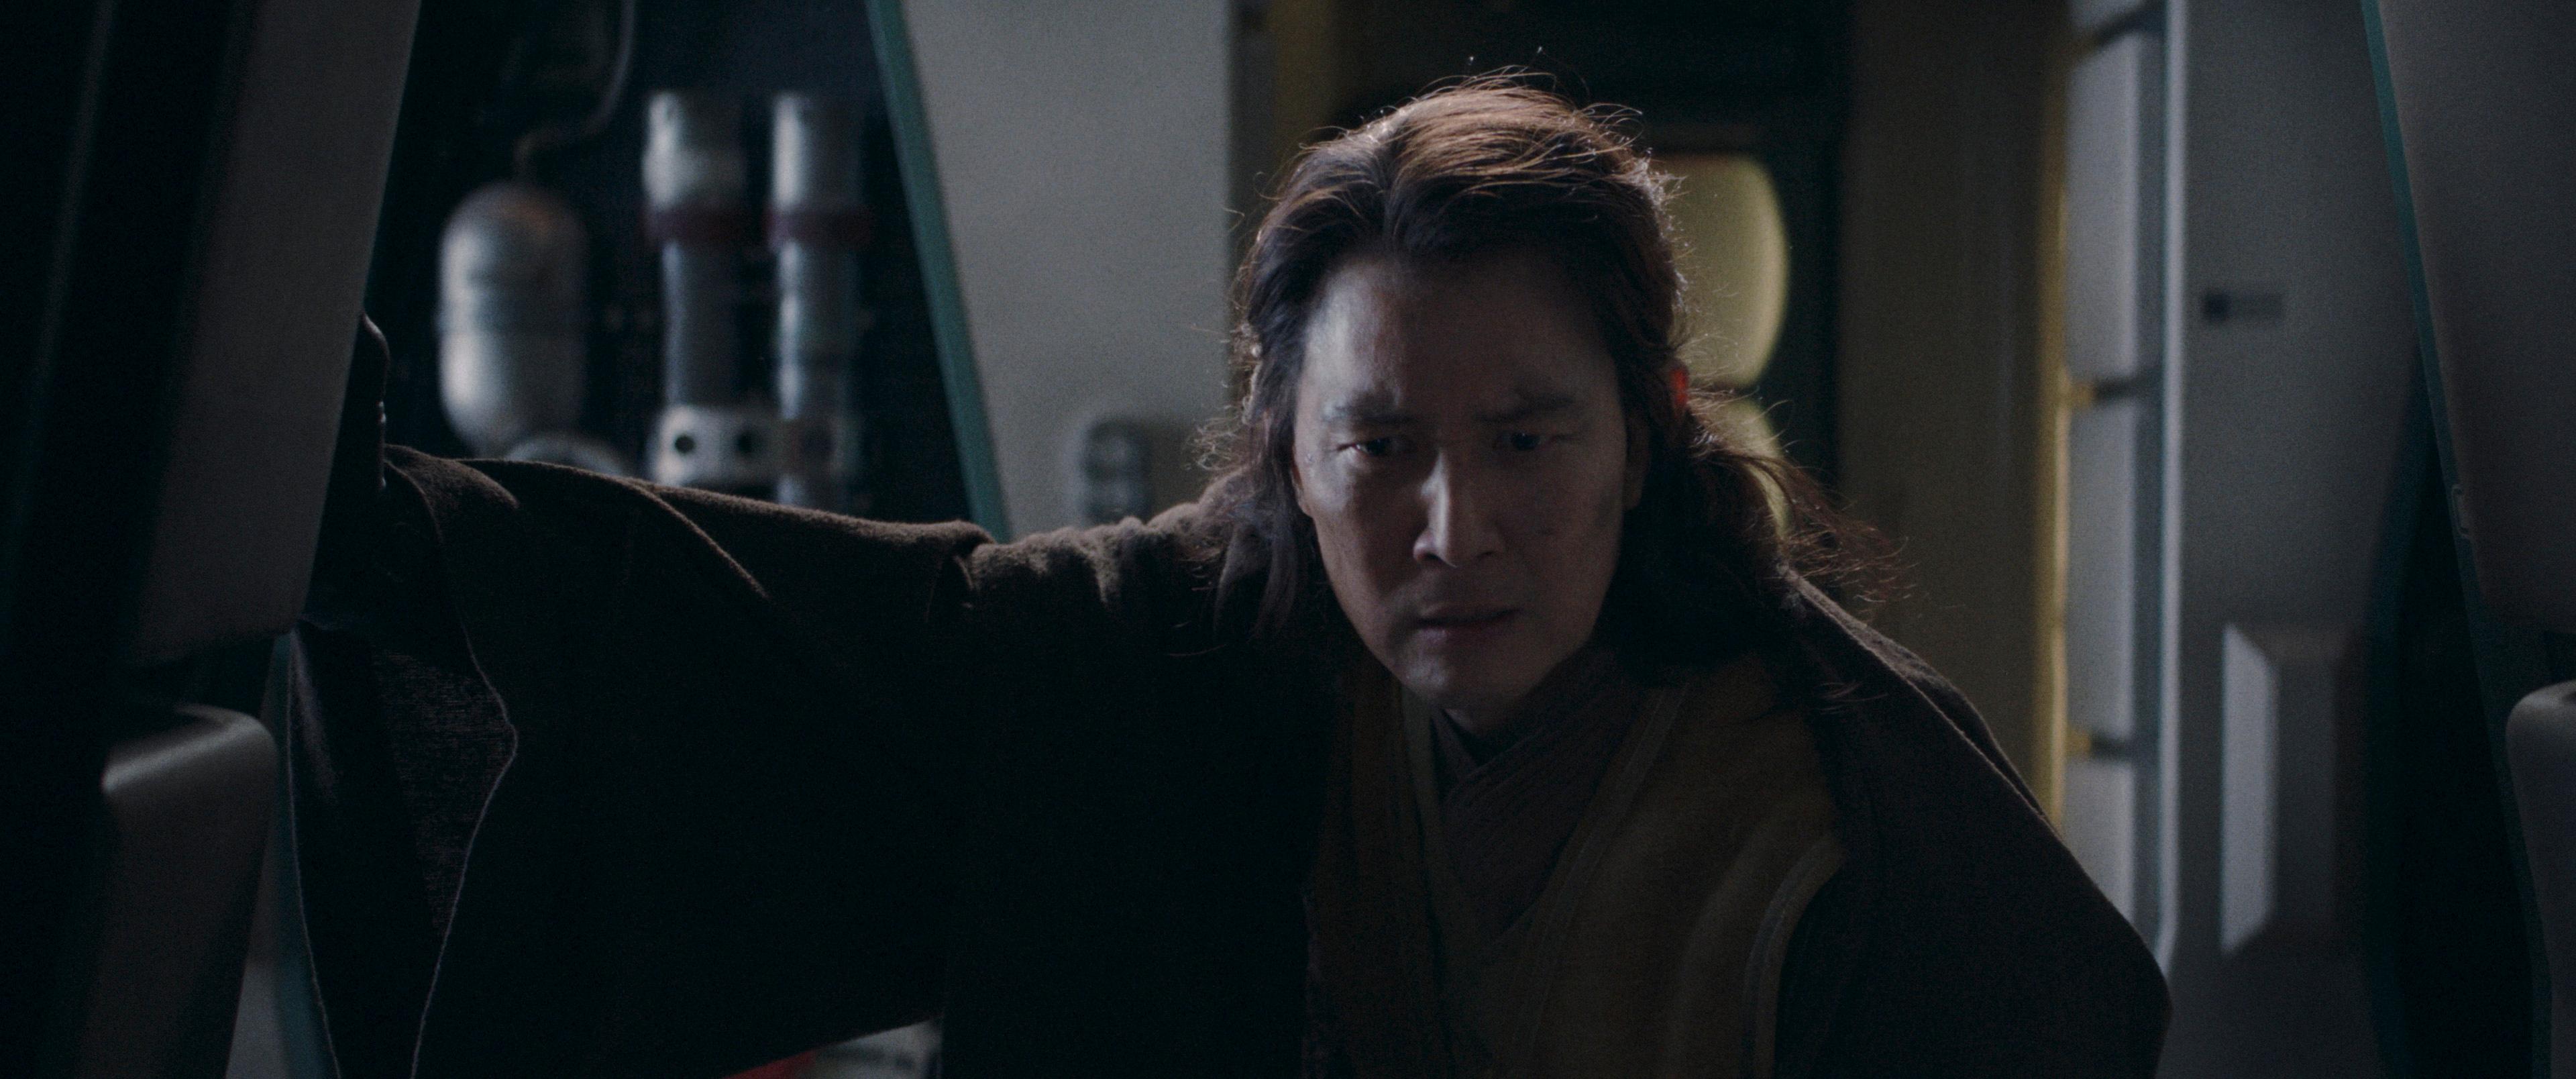 Master Sol (Lee Jung-jae) in THE ACOLYTE season 1 episode 6.